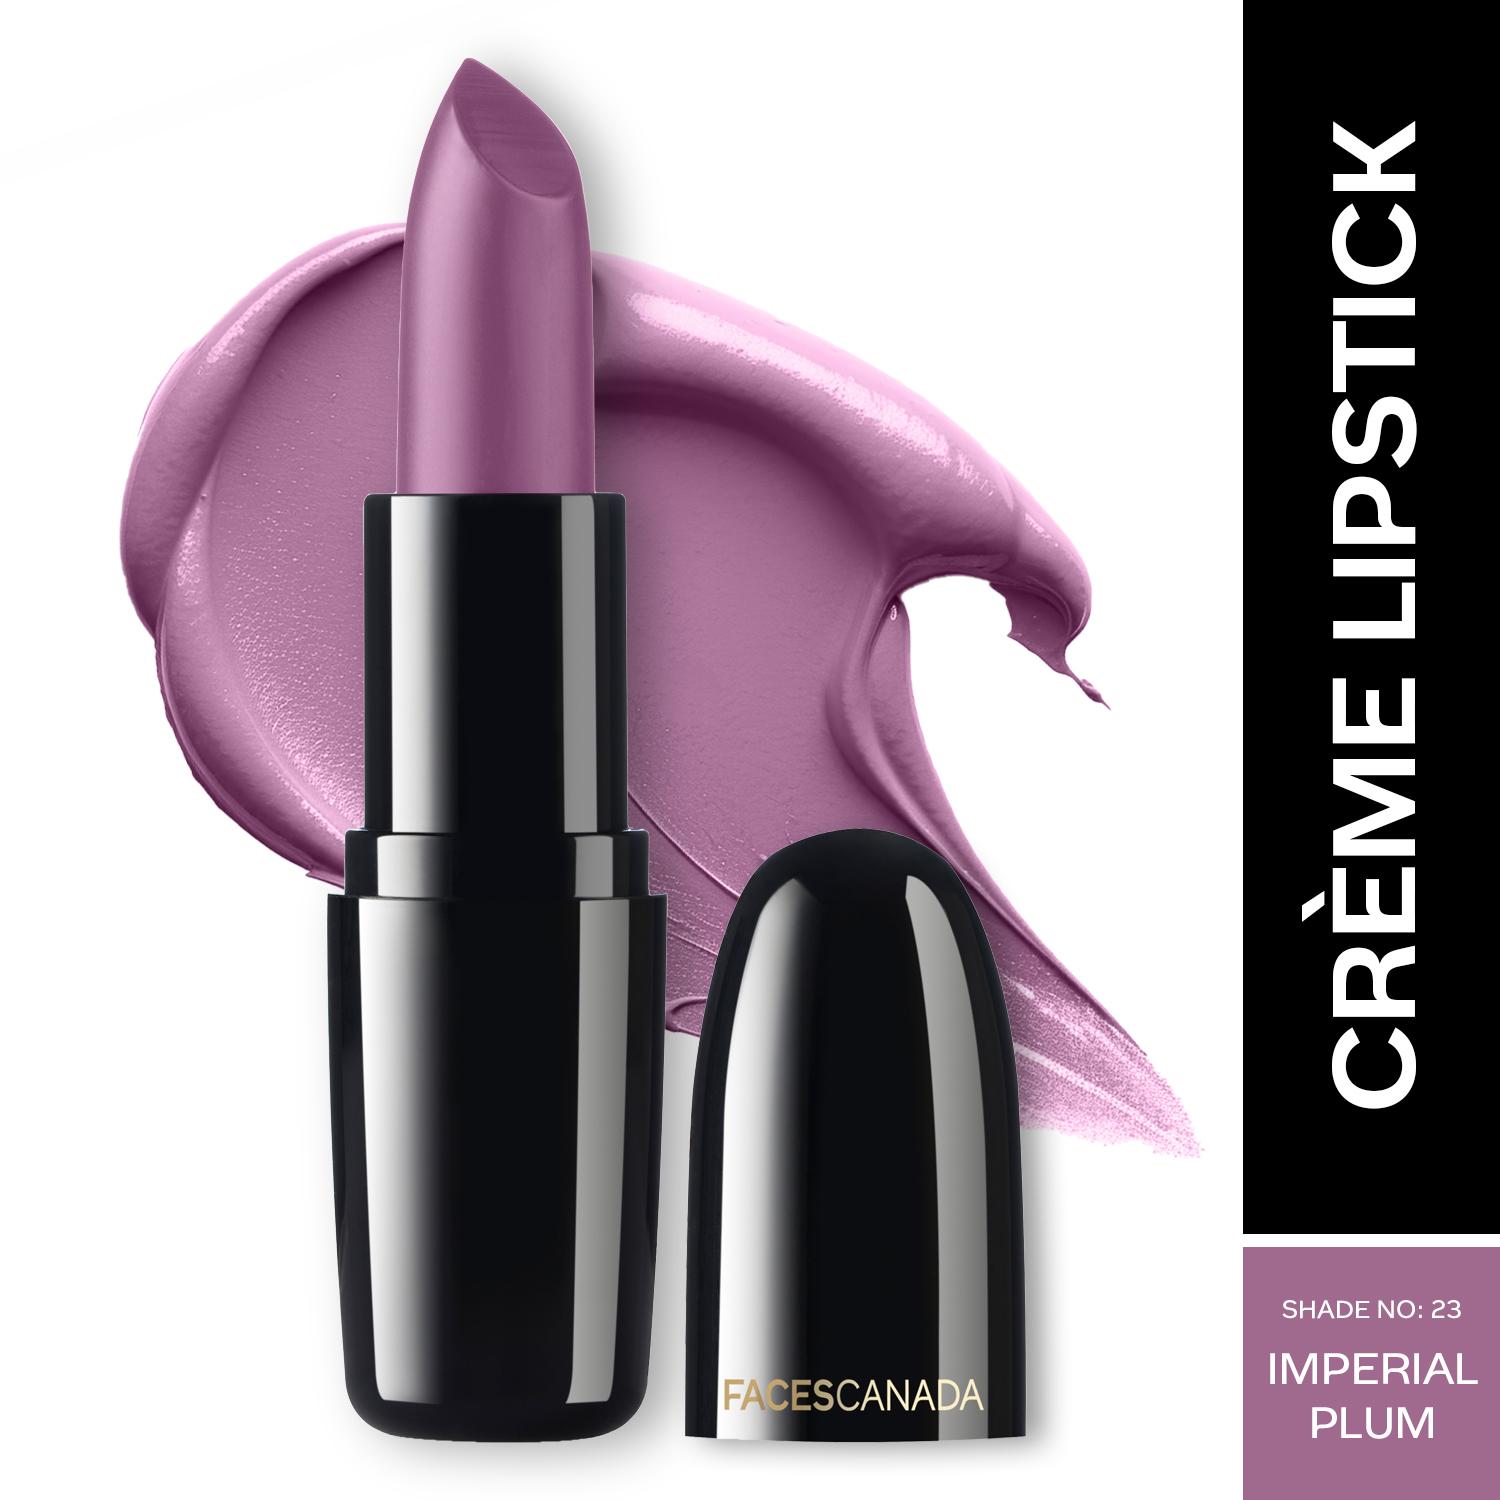 Faces Canada | Faces Canada Weightless Creme Finish Lipstick, Creamy Finish, Hydrated Lips - Imperial Plum 23 (4 g)